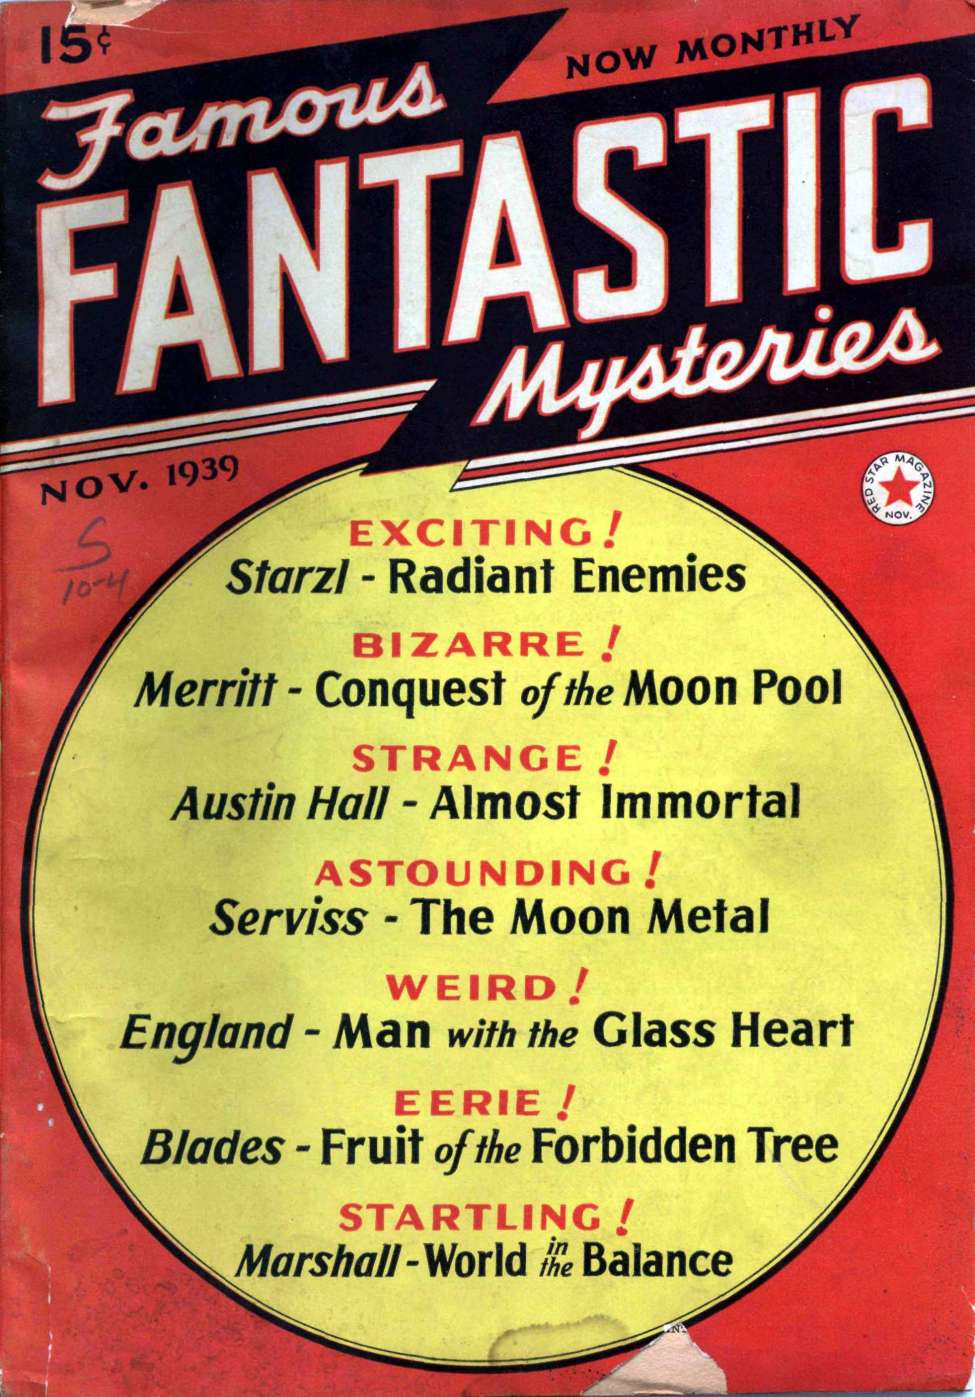 Comic Book Cover For Famous Fantastic Mysteries v1 2 - The Radiant Enemies - R. F. Starzl